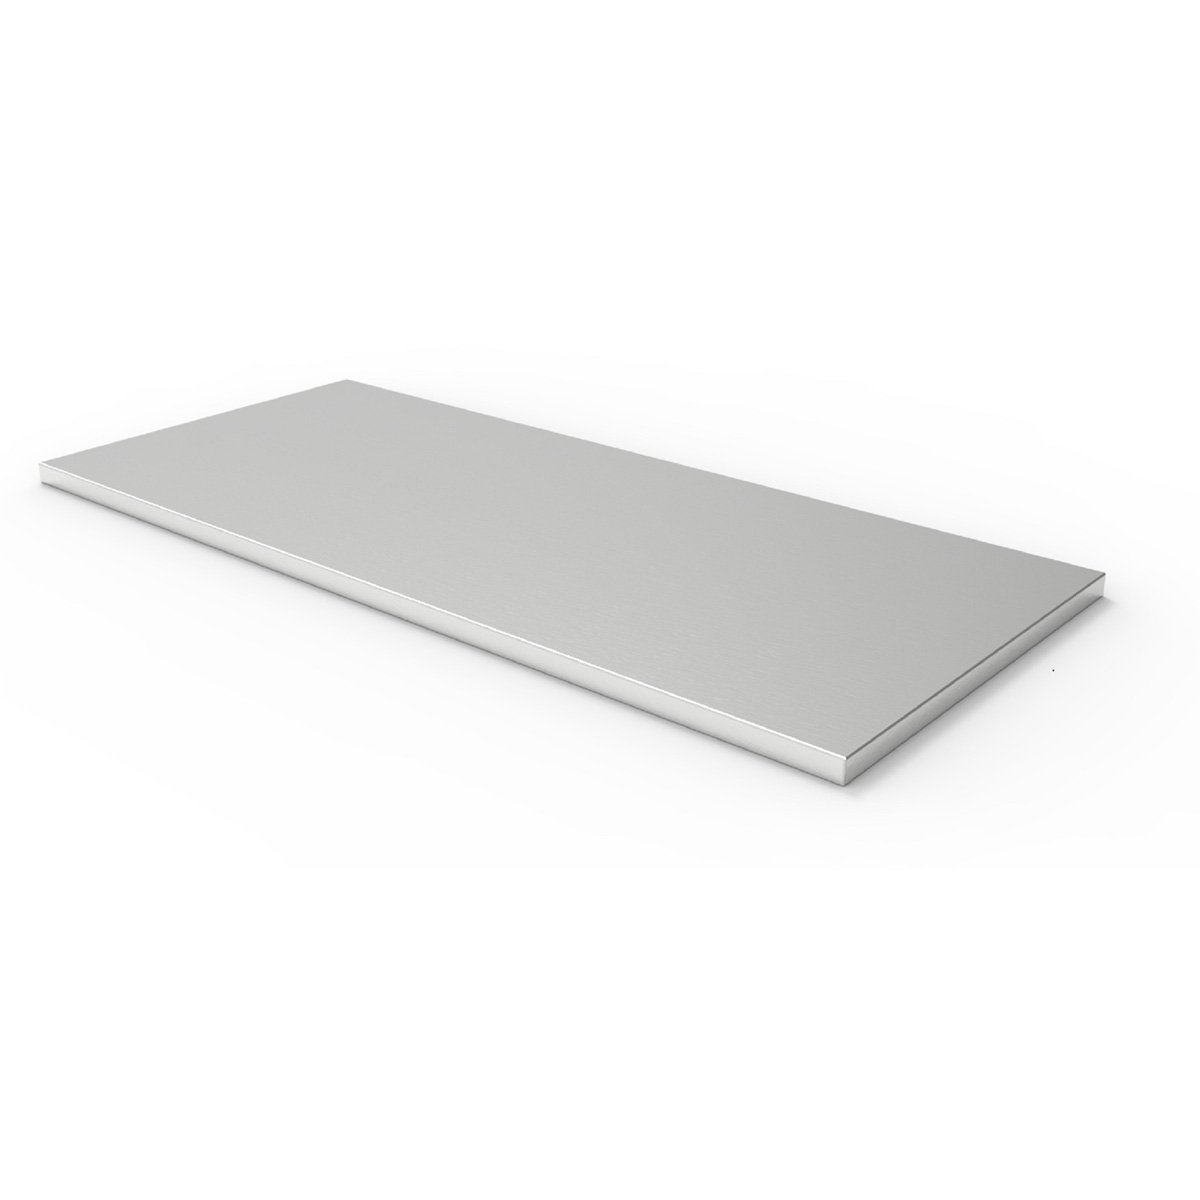 NewAge PRO / Performance 3.0 Series 56-Inch Stainless Steel Top